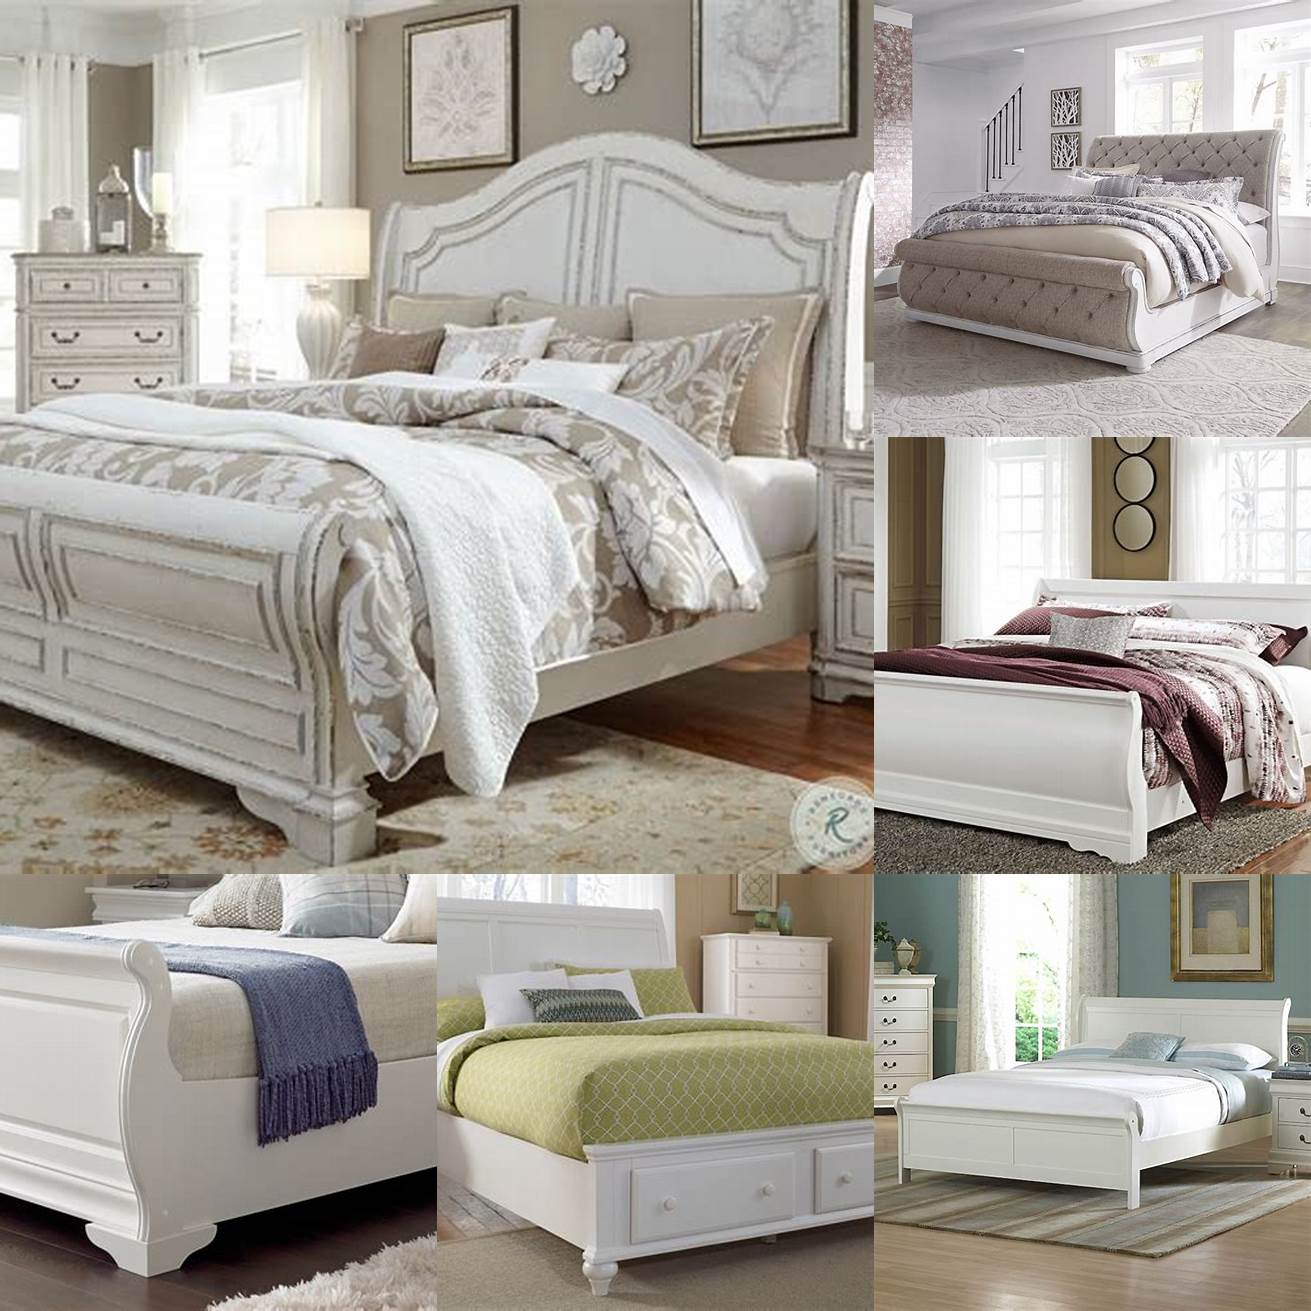 4 White Queen Size Sleigh Bed